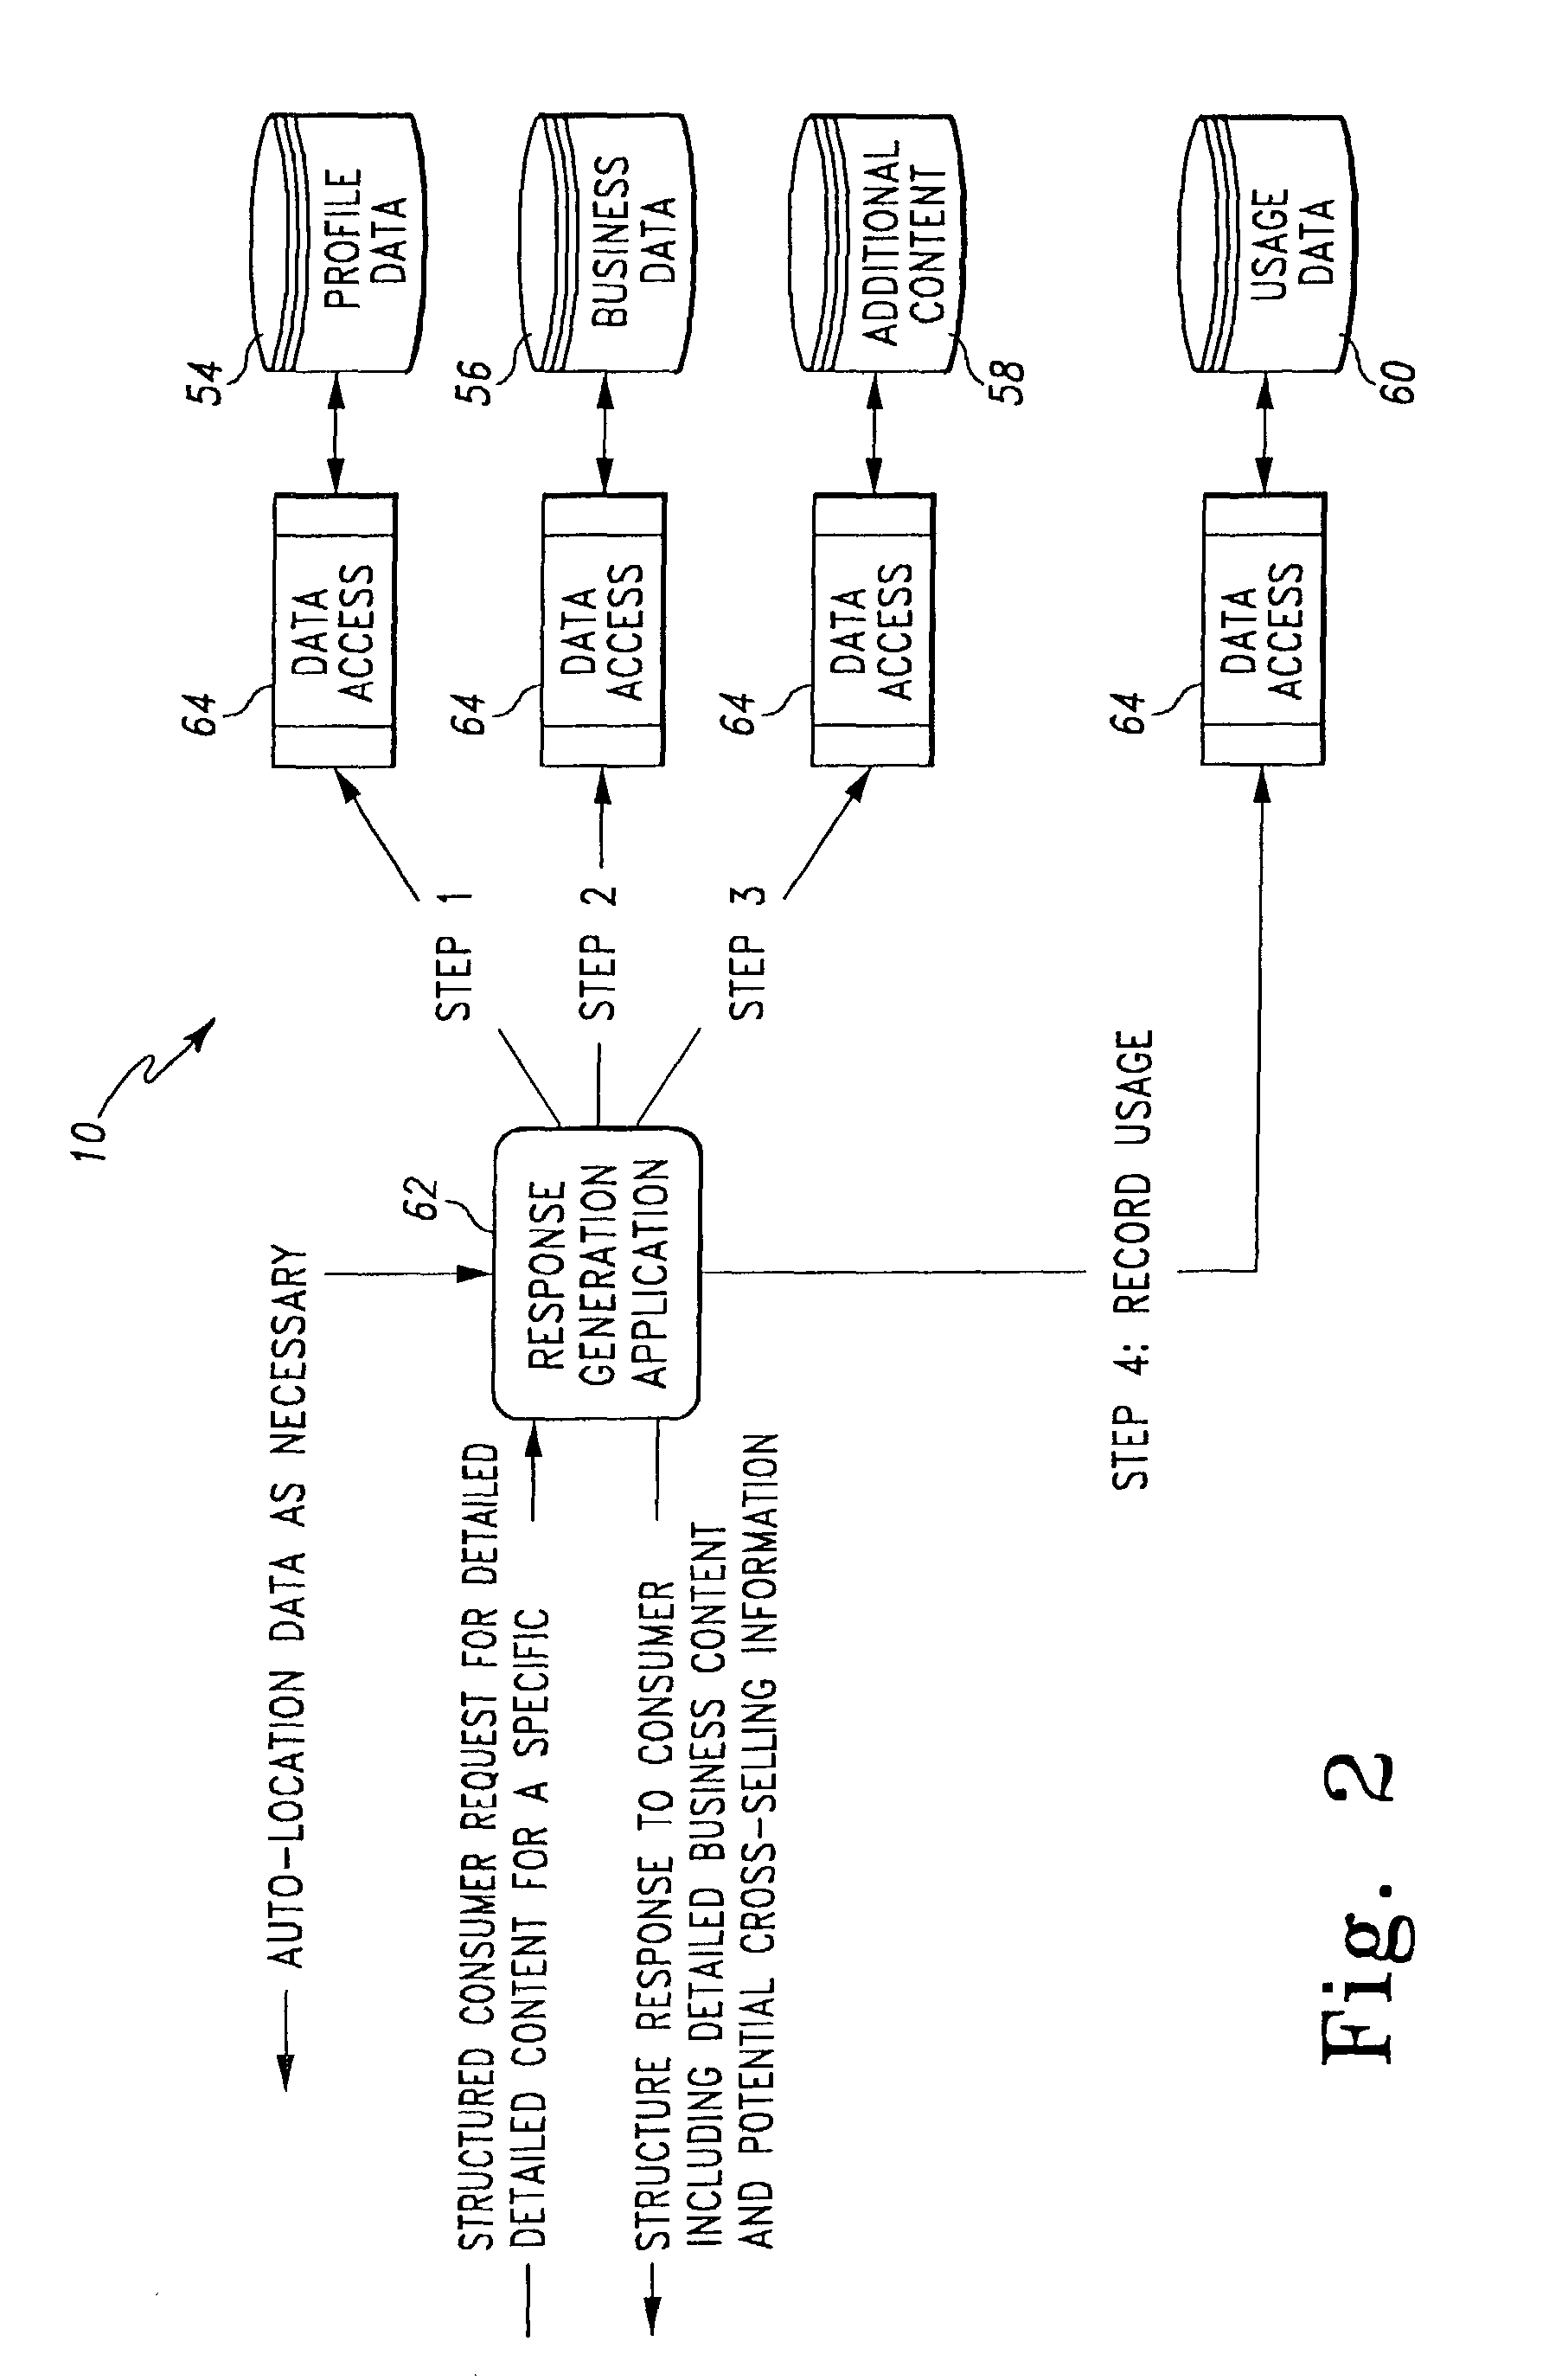 Natural language processing for a location-based services system